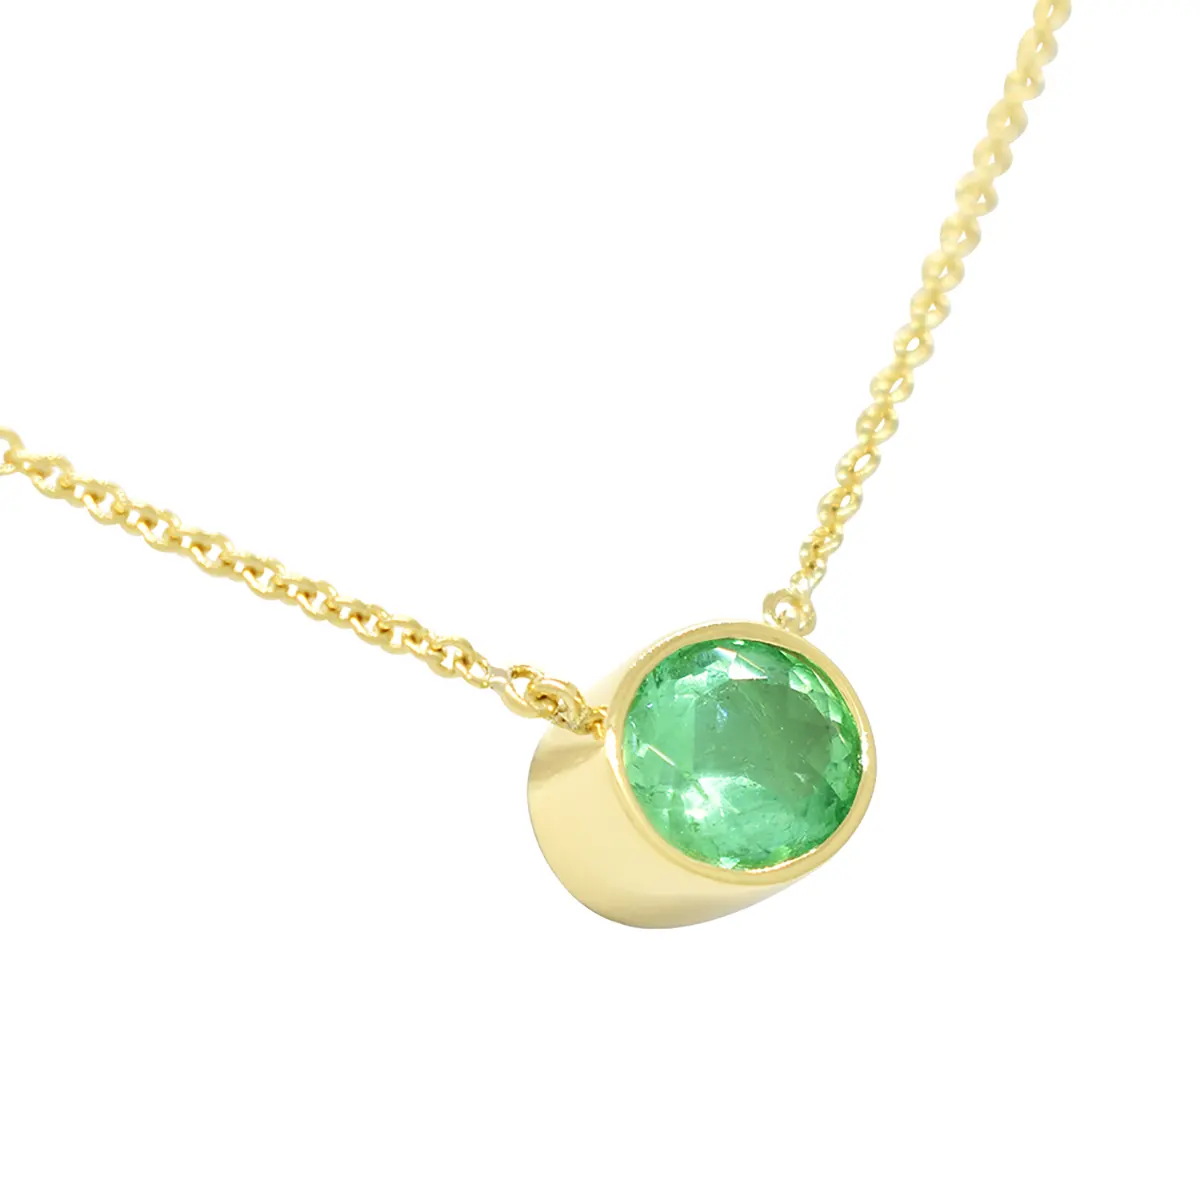 Bezel Set Solitaire Emerald Necklace in 18K Yellow Gold With Oval Shape Emerald